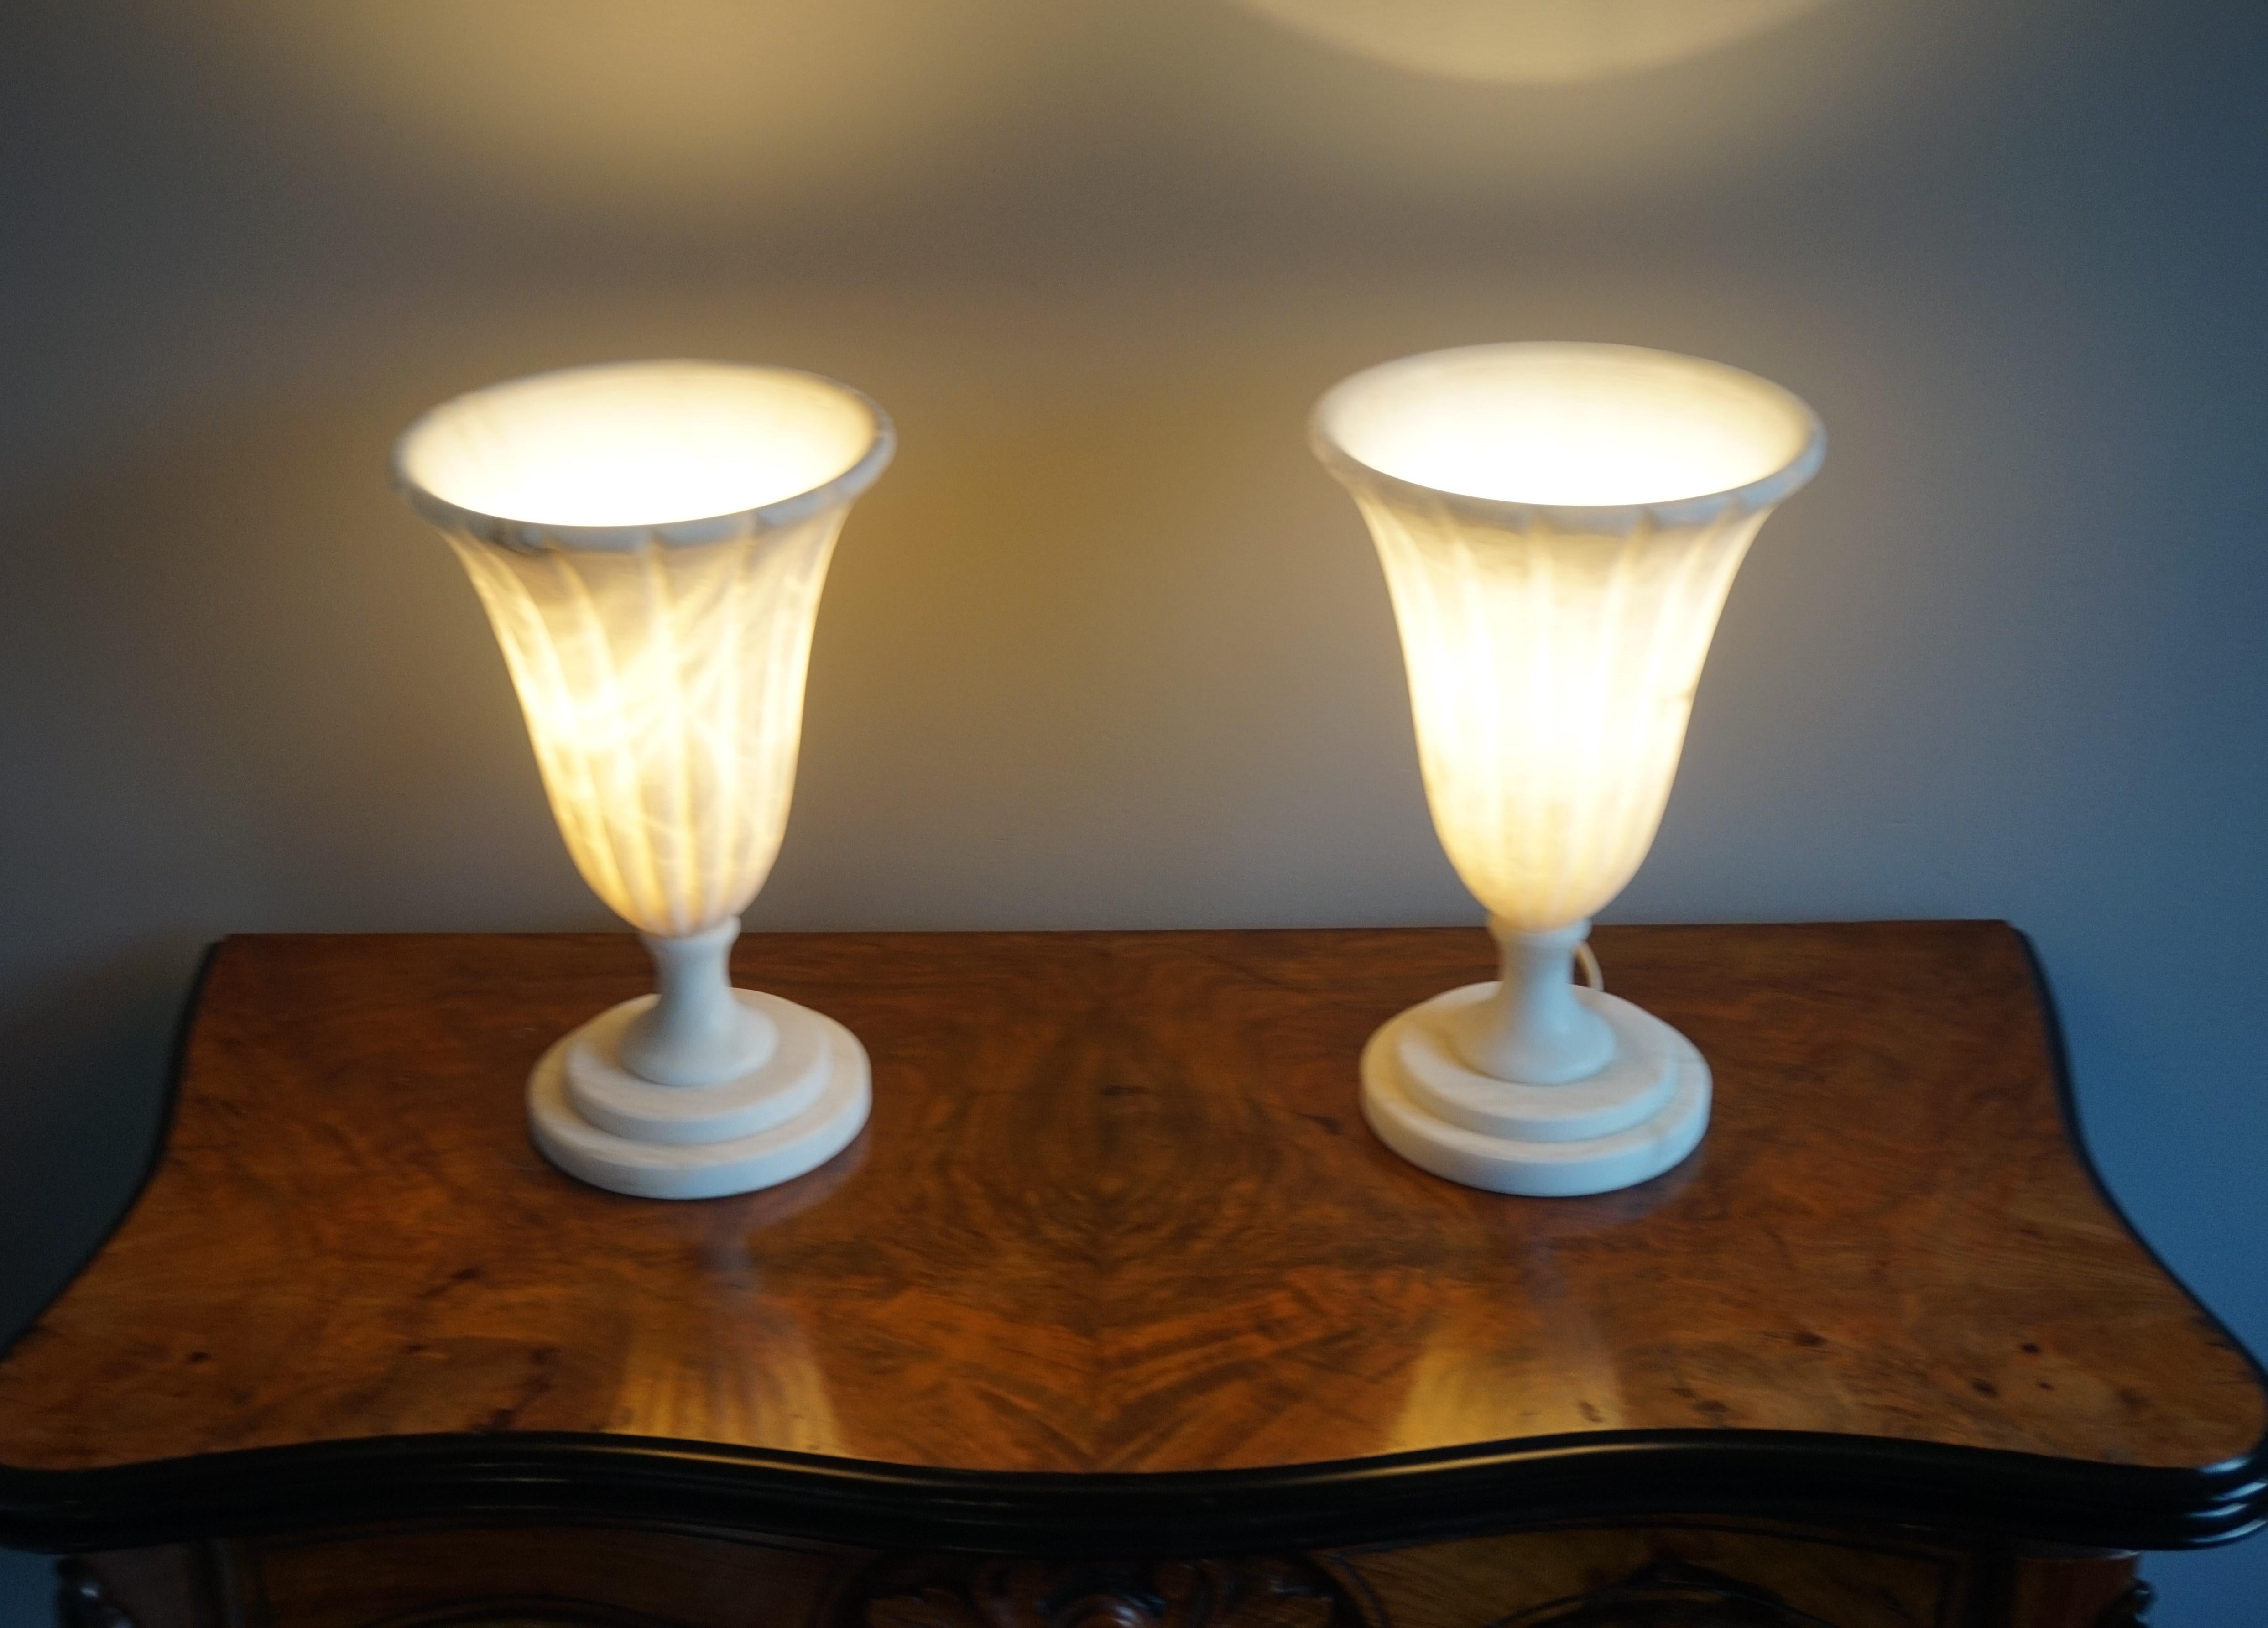 Rare pair of midcentury made alabaster table or desk lamps / classical style handcrafted and very stylish pair of midcentury made alabaster lamps.

If you are looking for a great shape and practical size pair of table lamps to grace your living